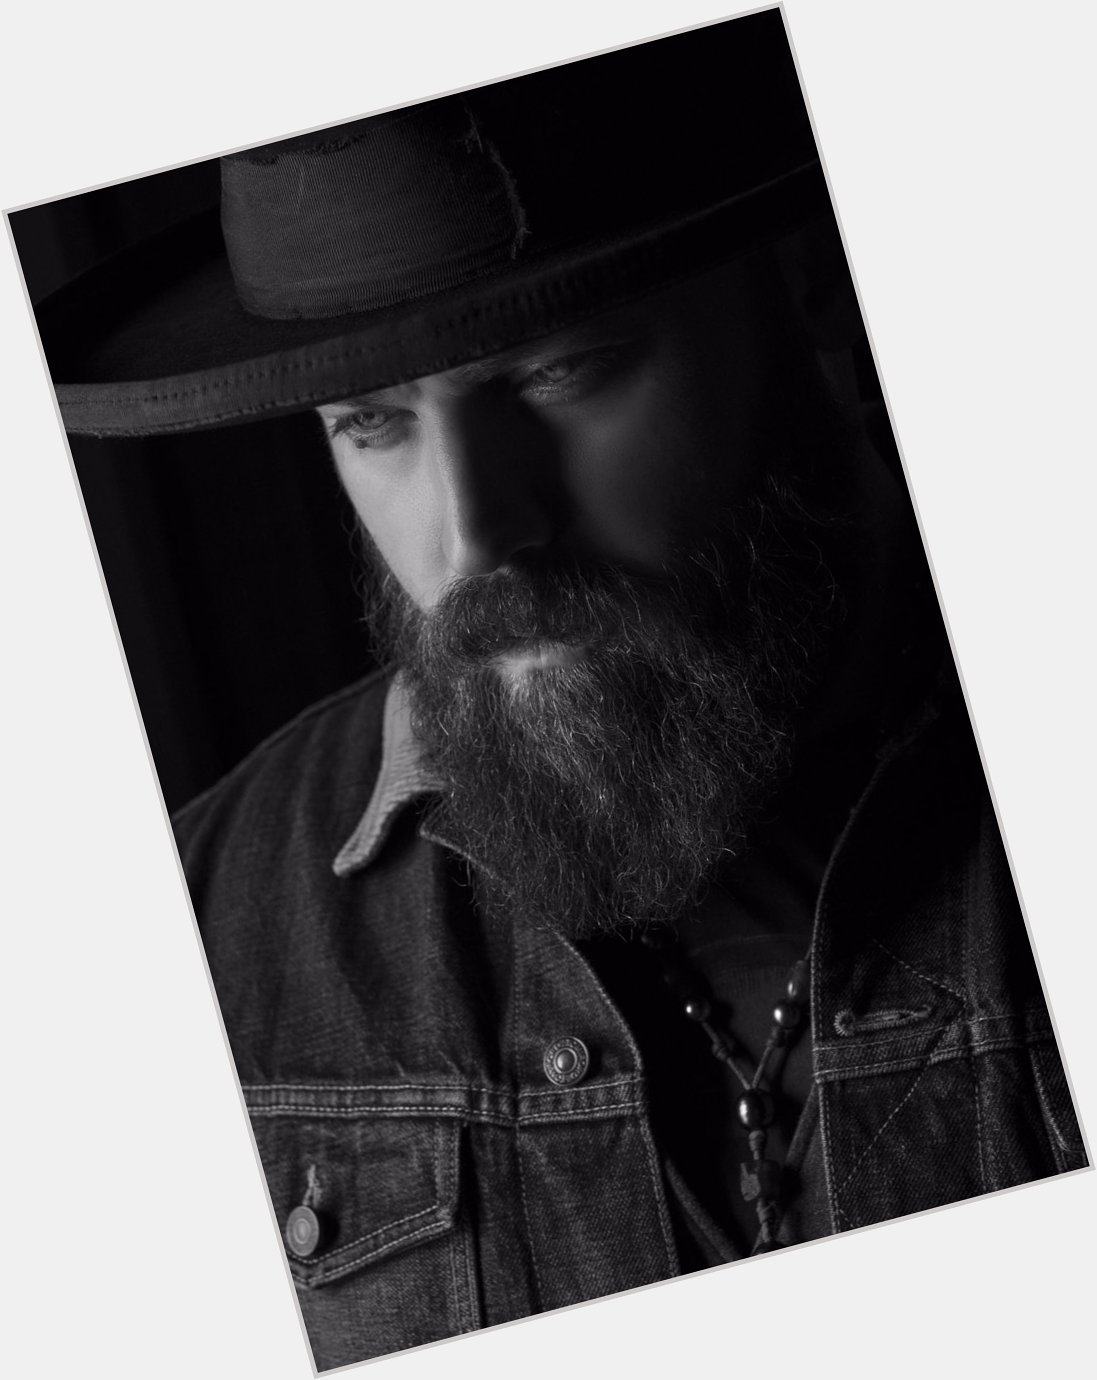 Zac Brown Portrait I took during the sessions for his new album Welcome Home. Happy birthday today!! 